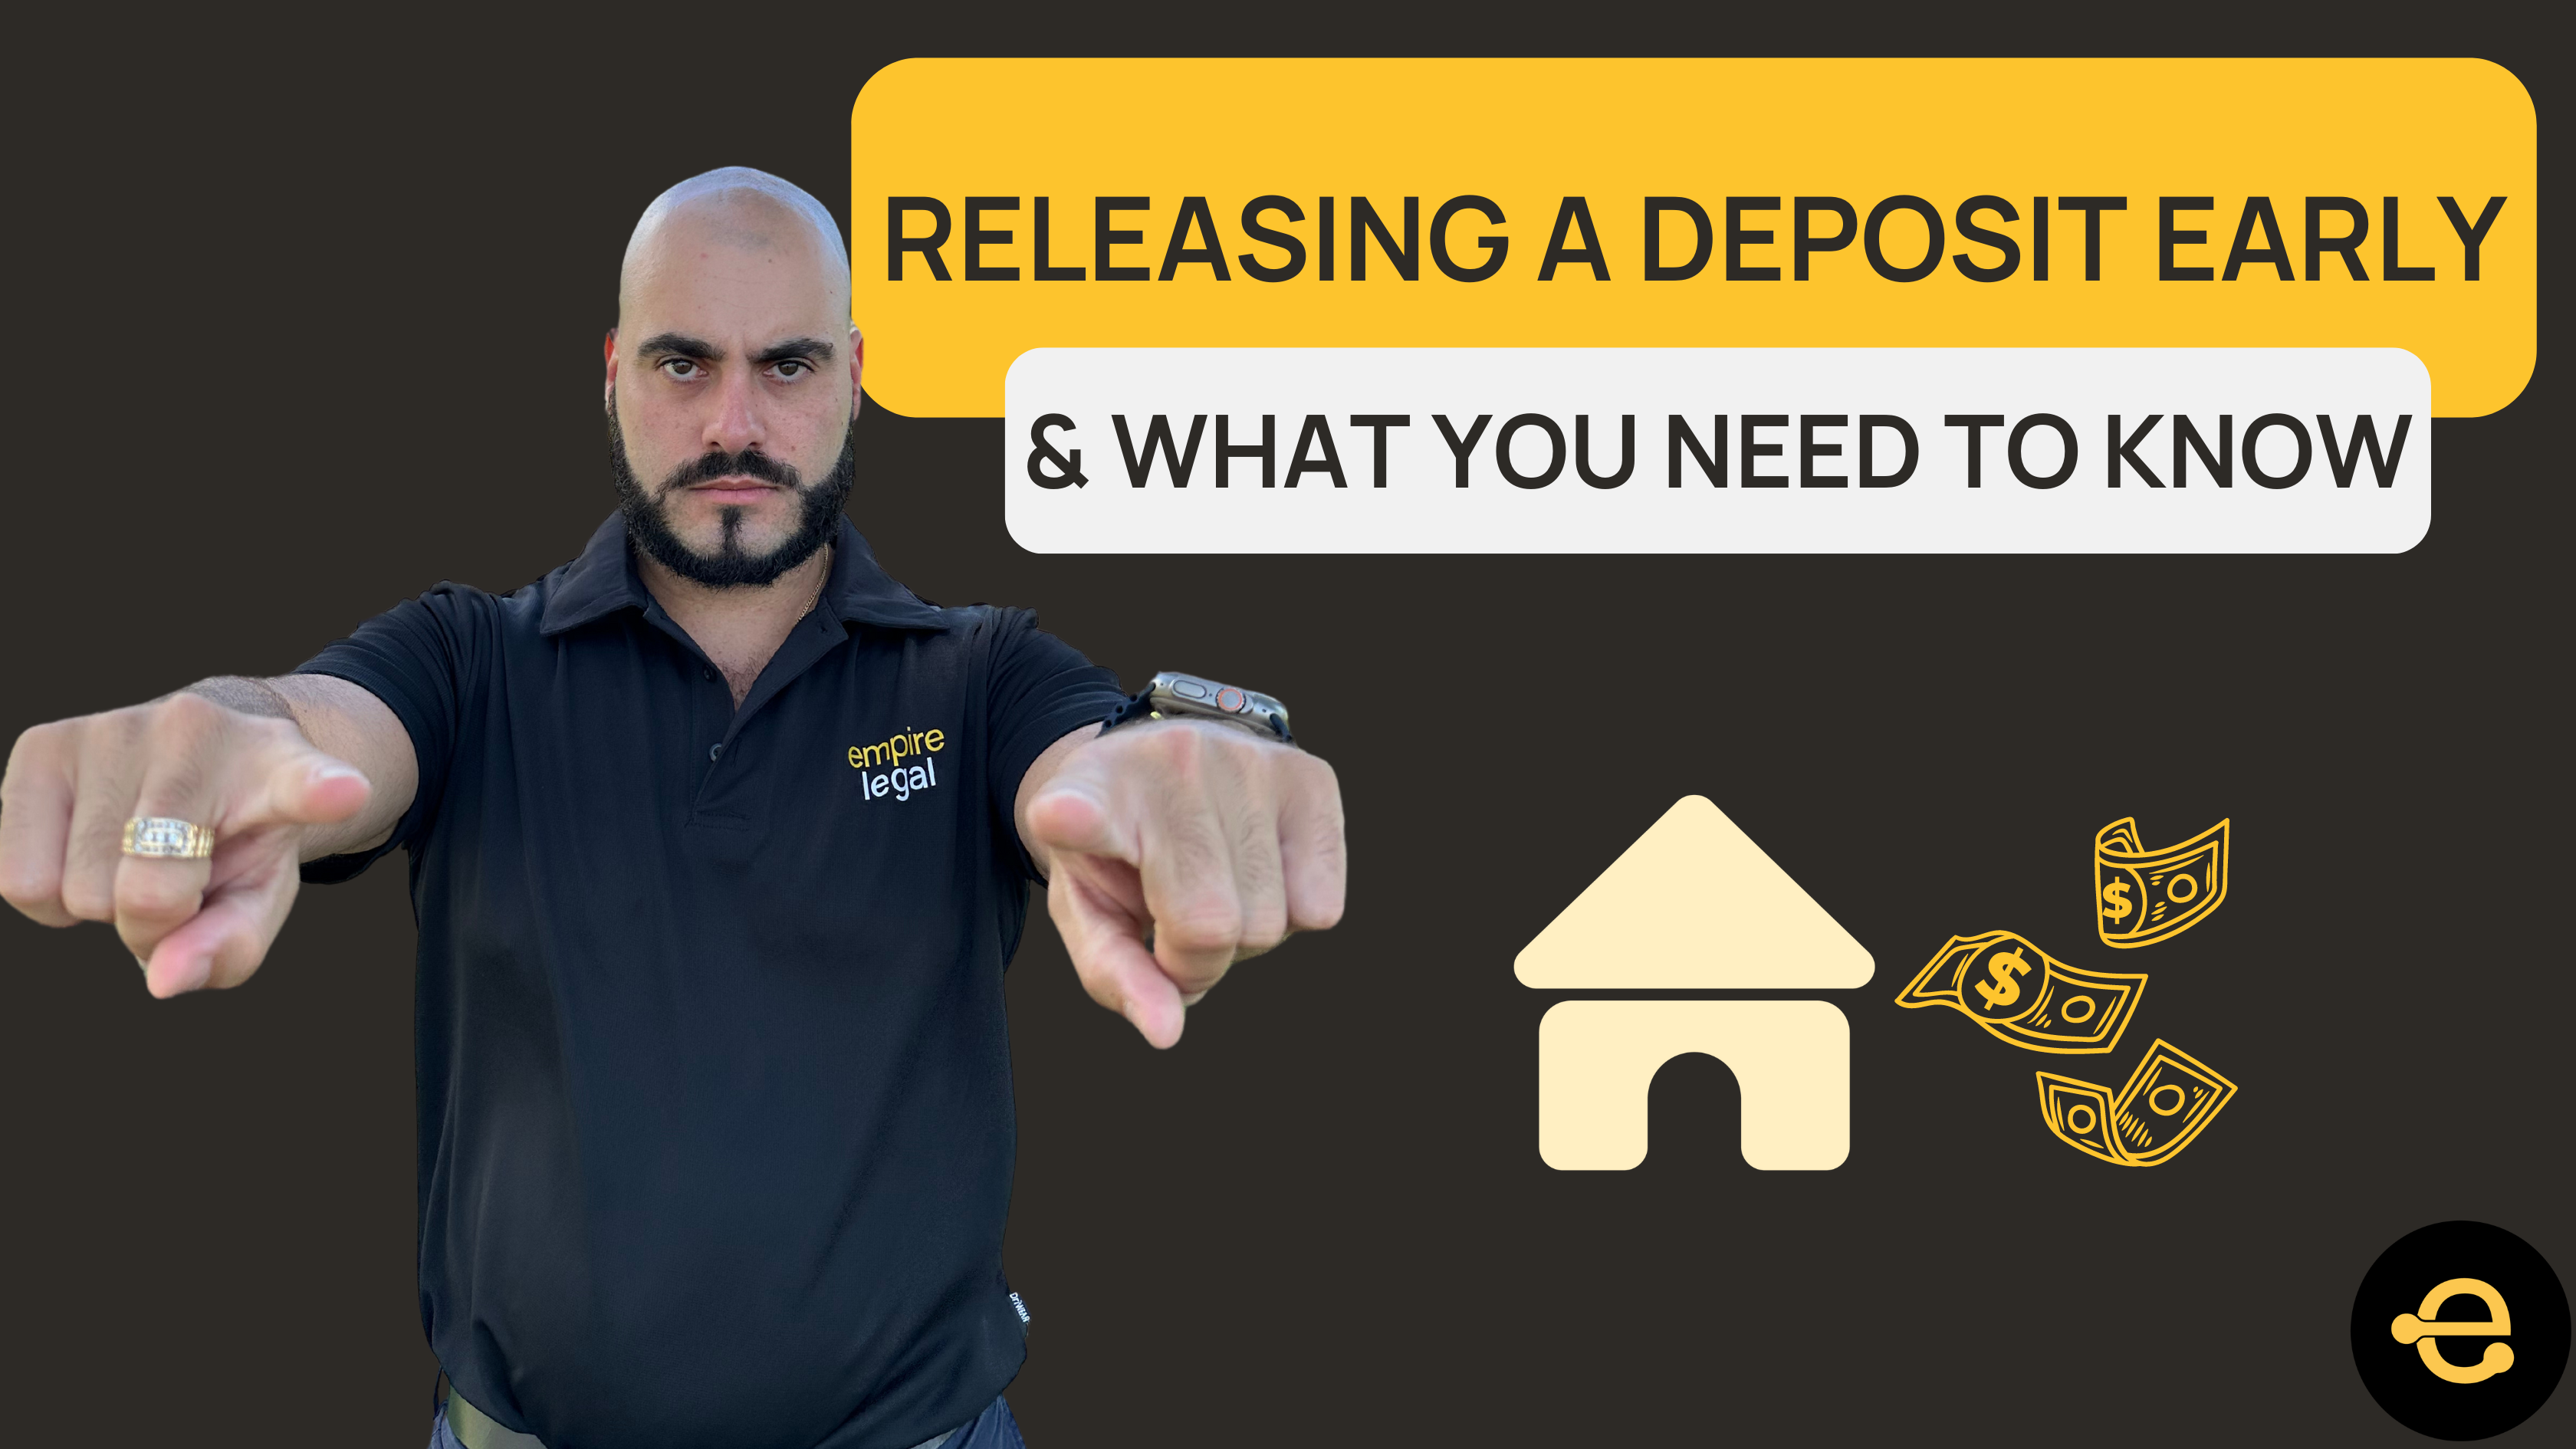 Early Release of Deposit in QLD - what you need to consider